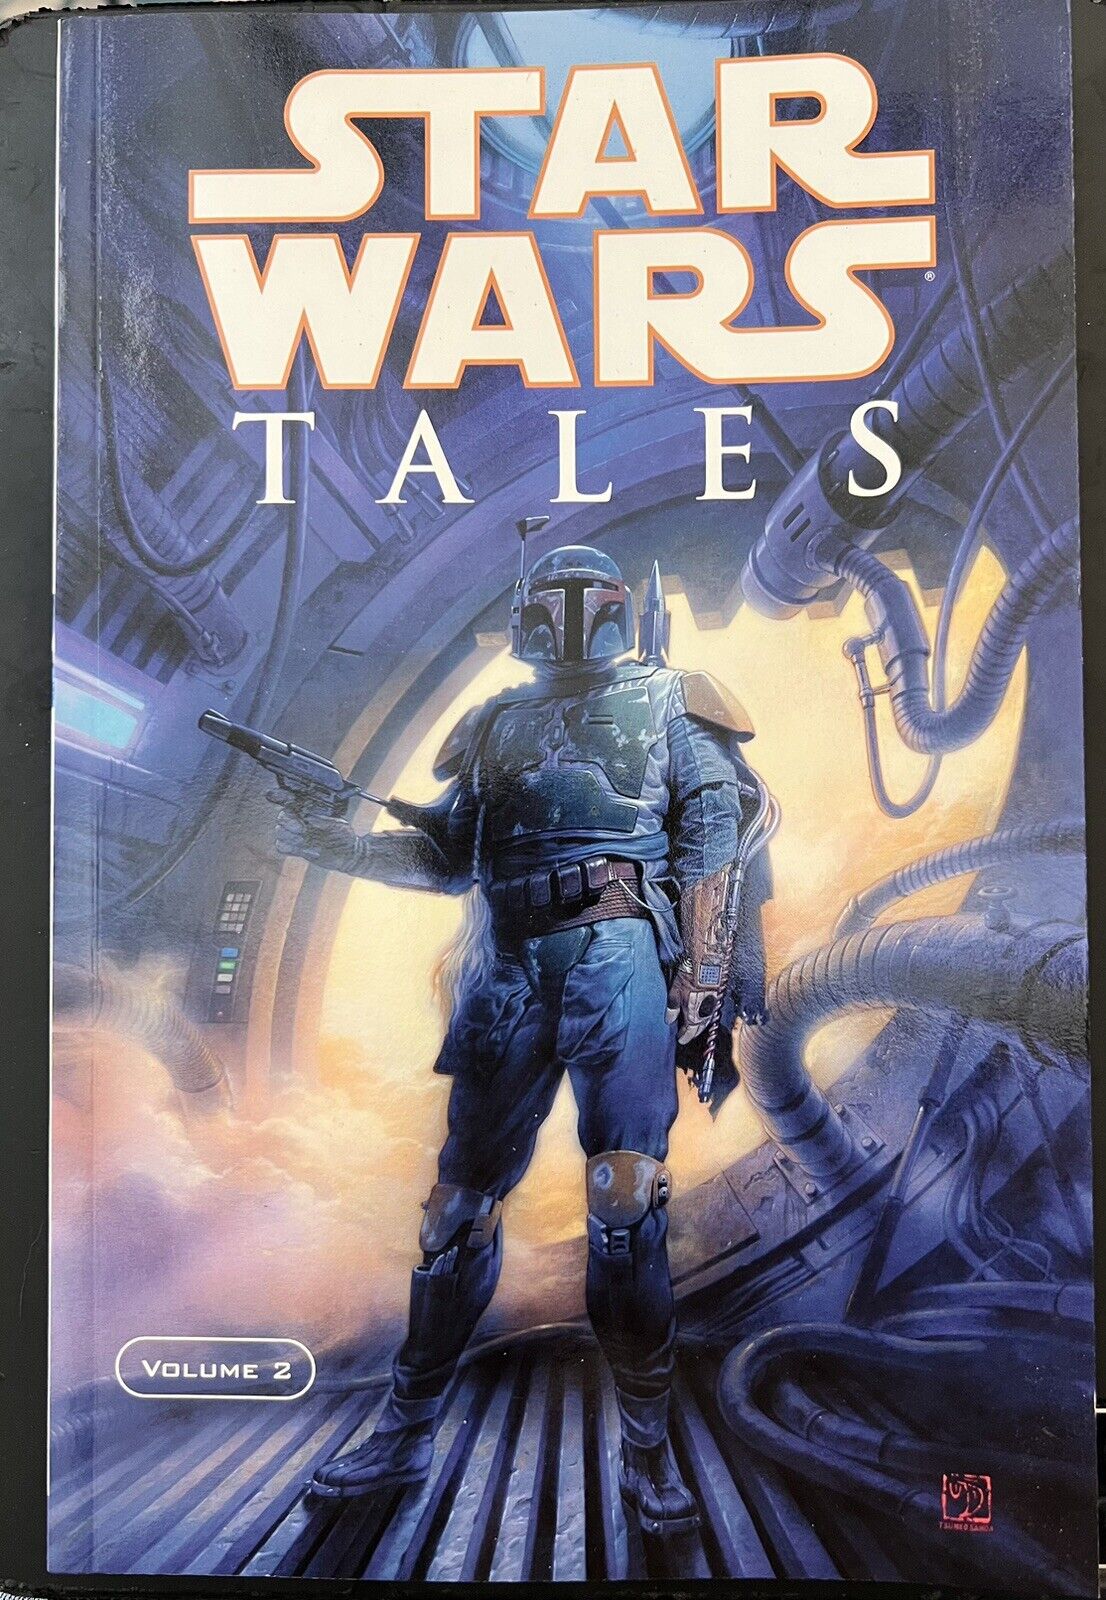 Star Wars Tales Volume 2 Graphic Novel Boba Fett 2002 First Edition Hardcover